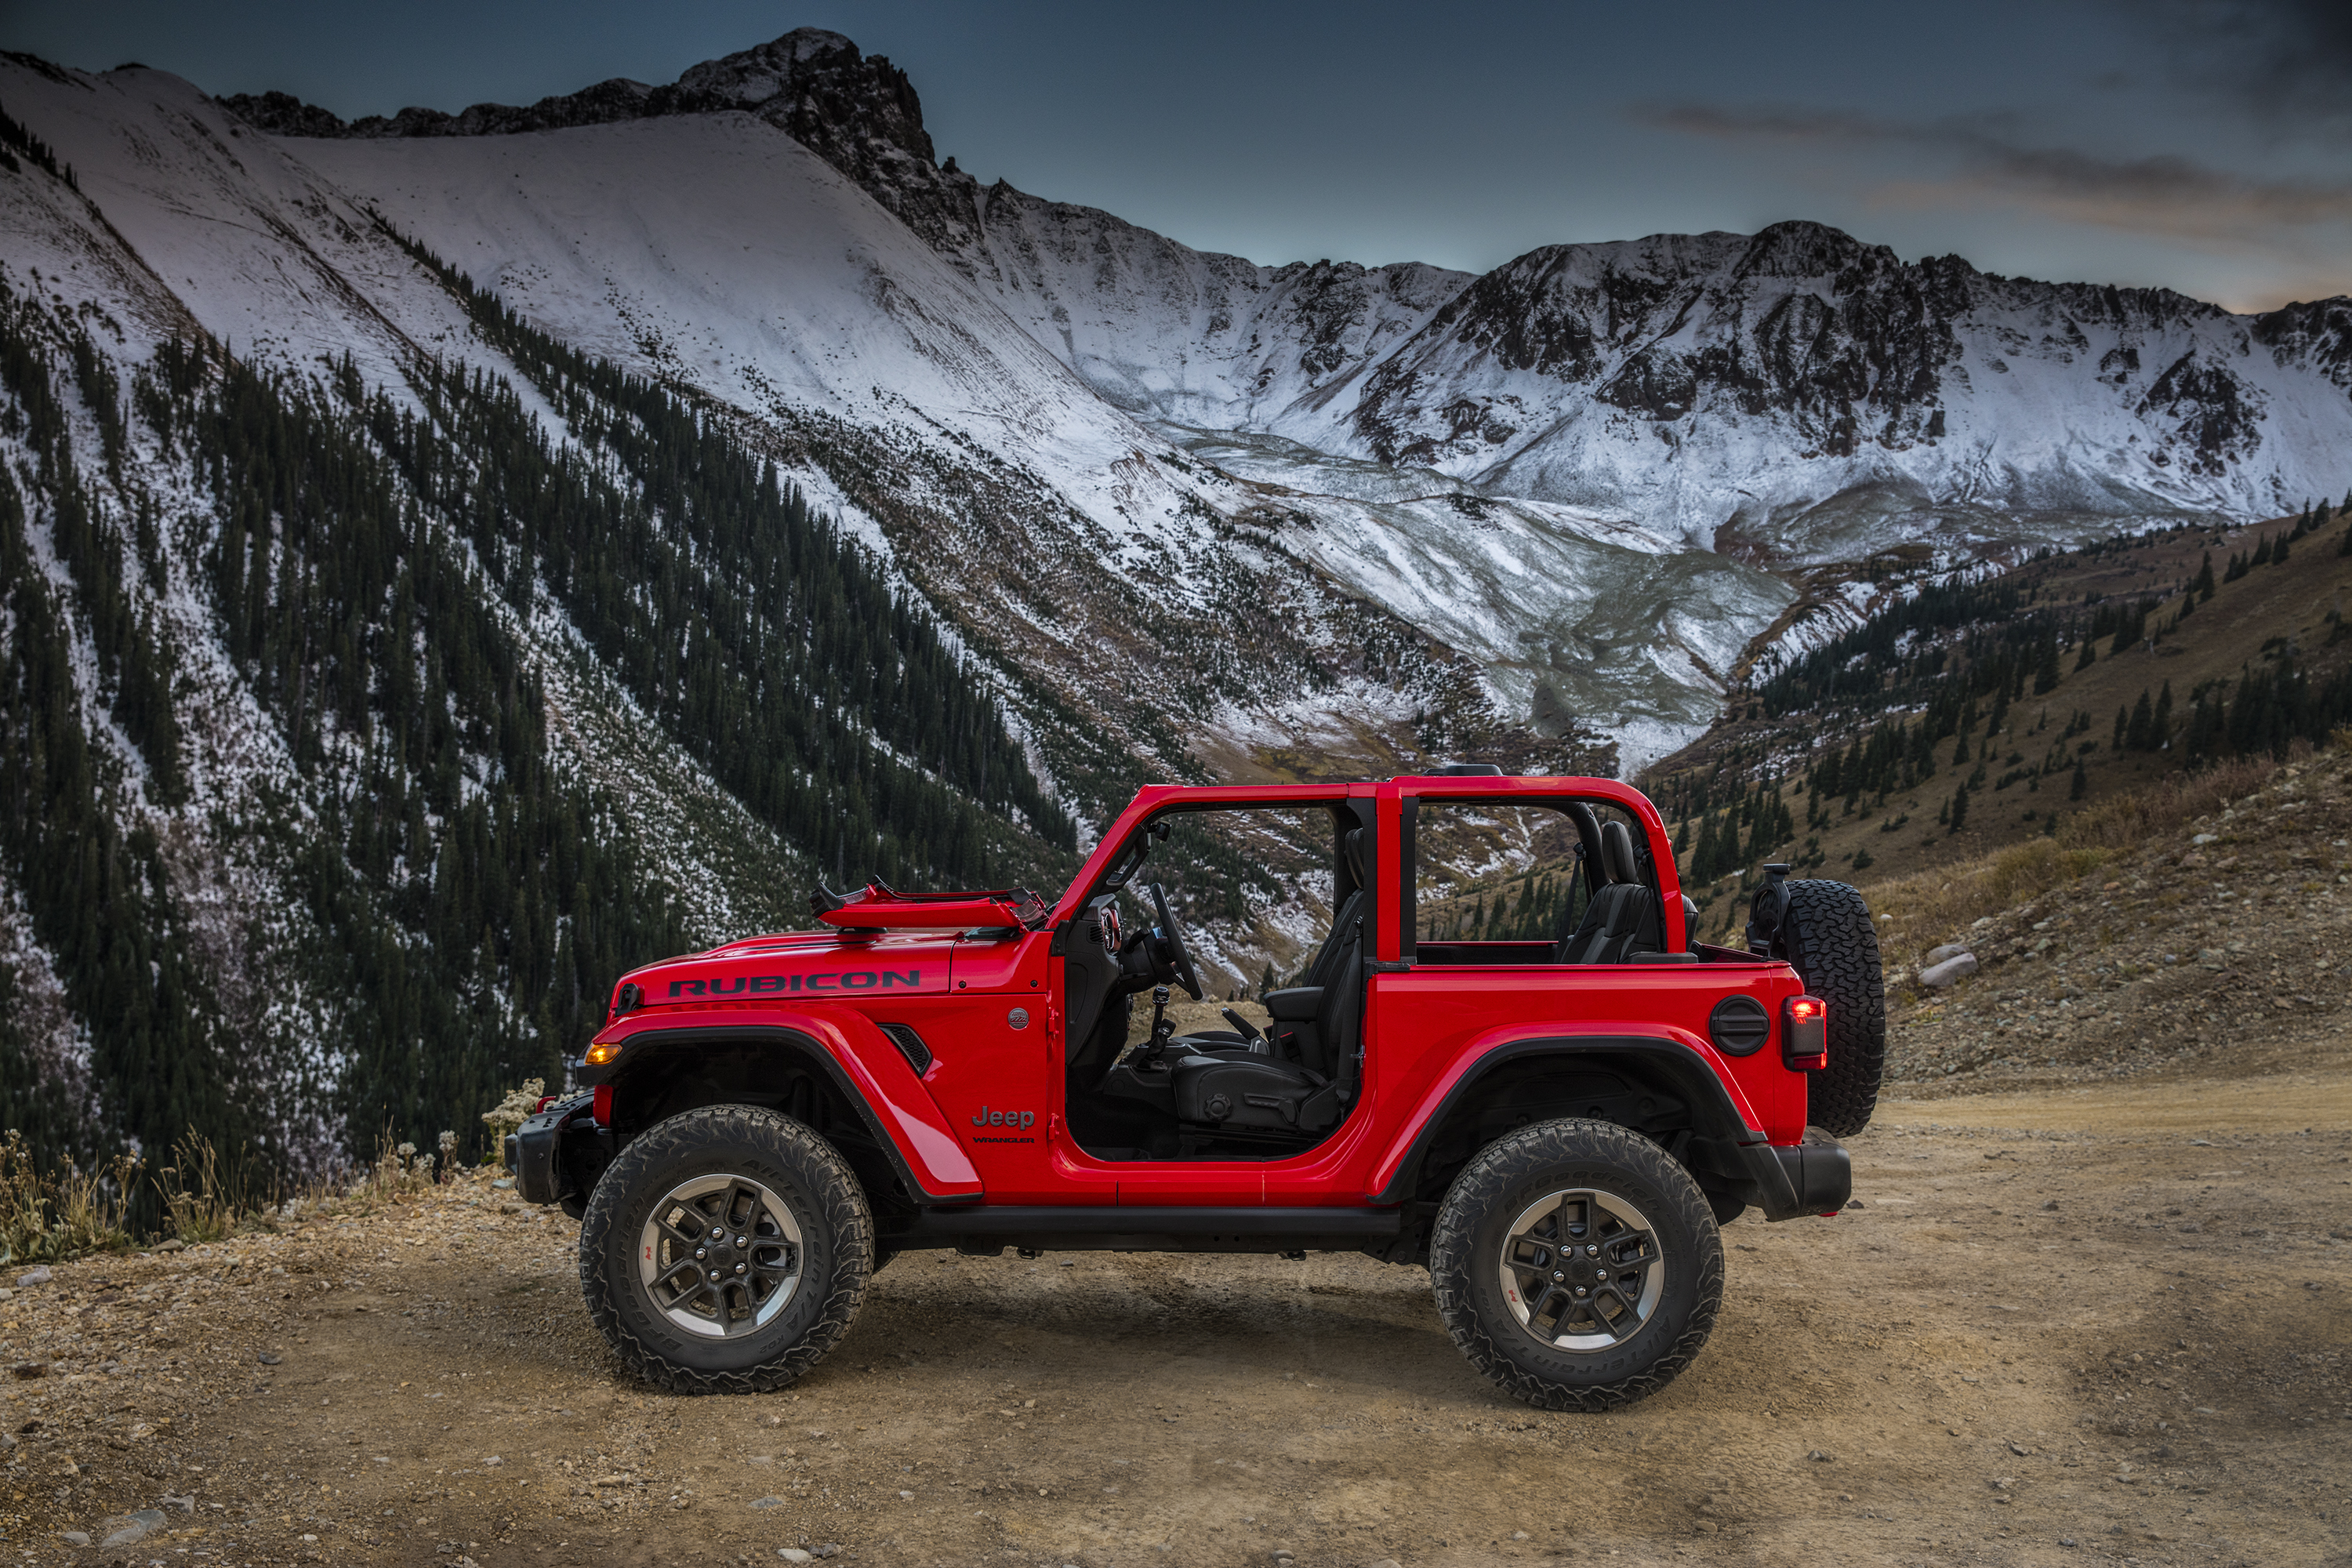 2018 jeep wrangler news rumors specs performance release date all new rubicon